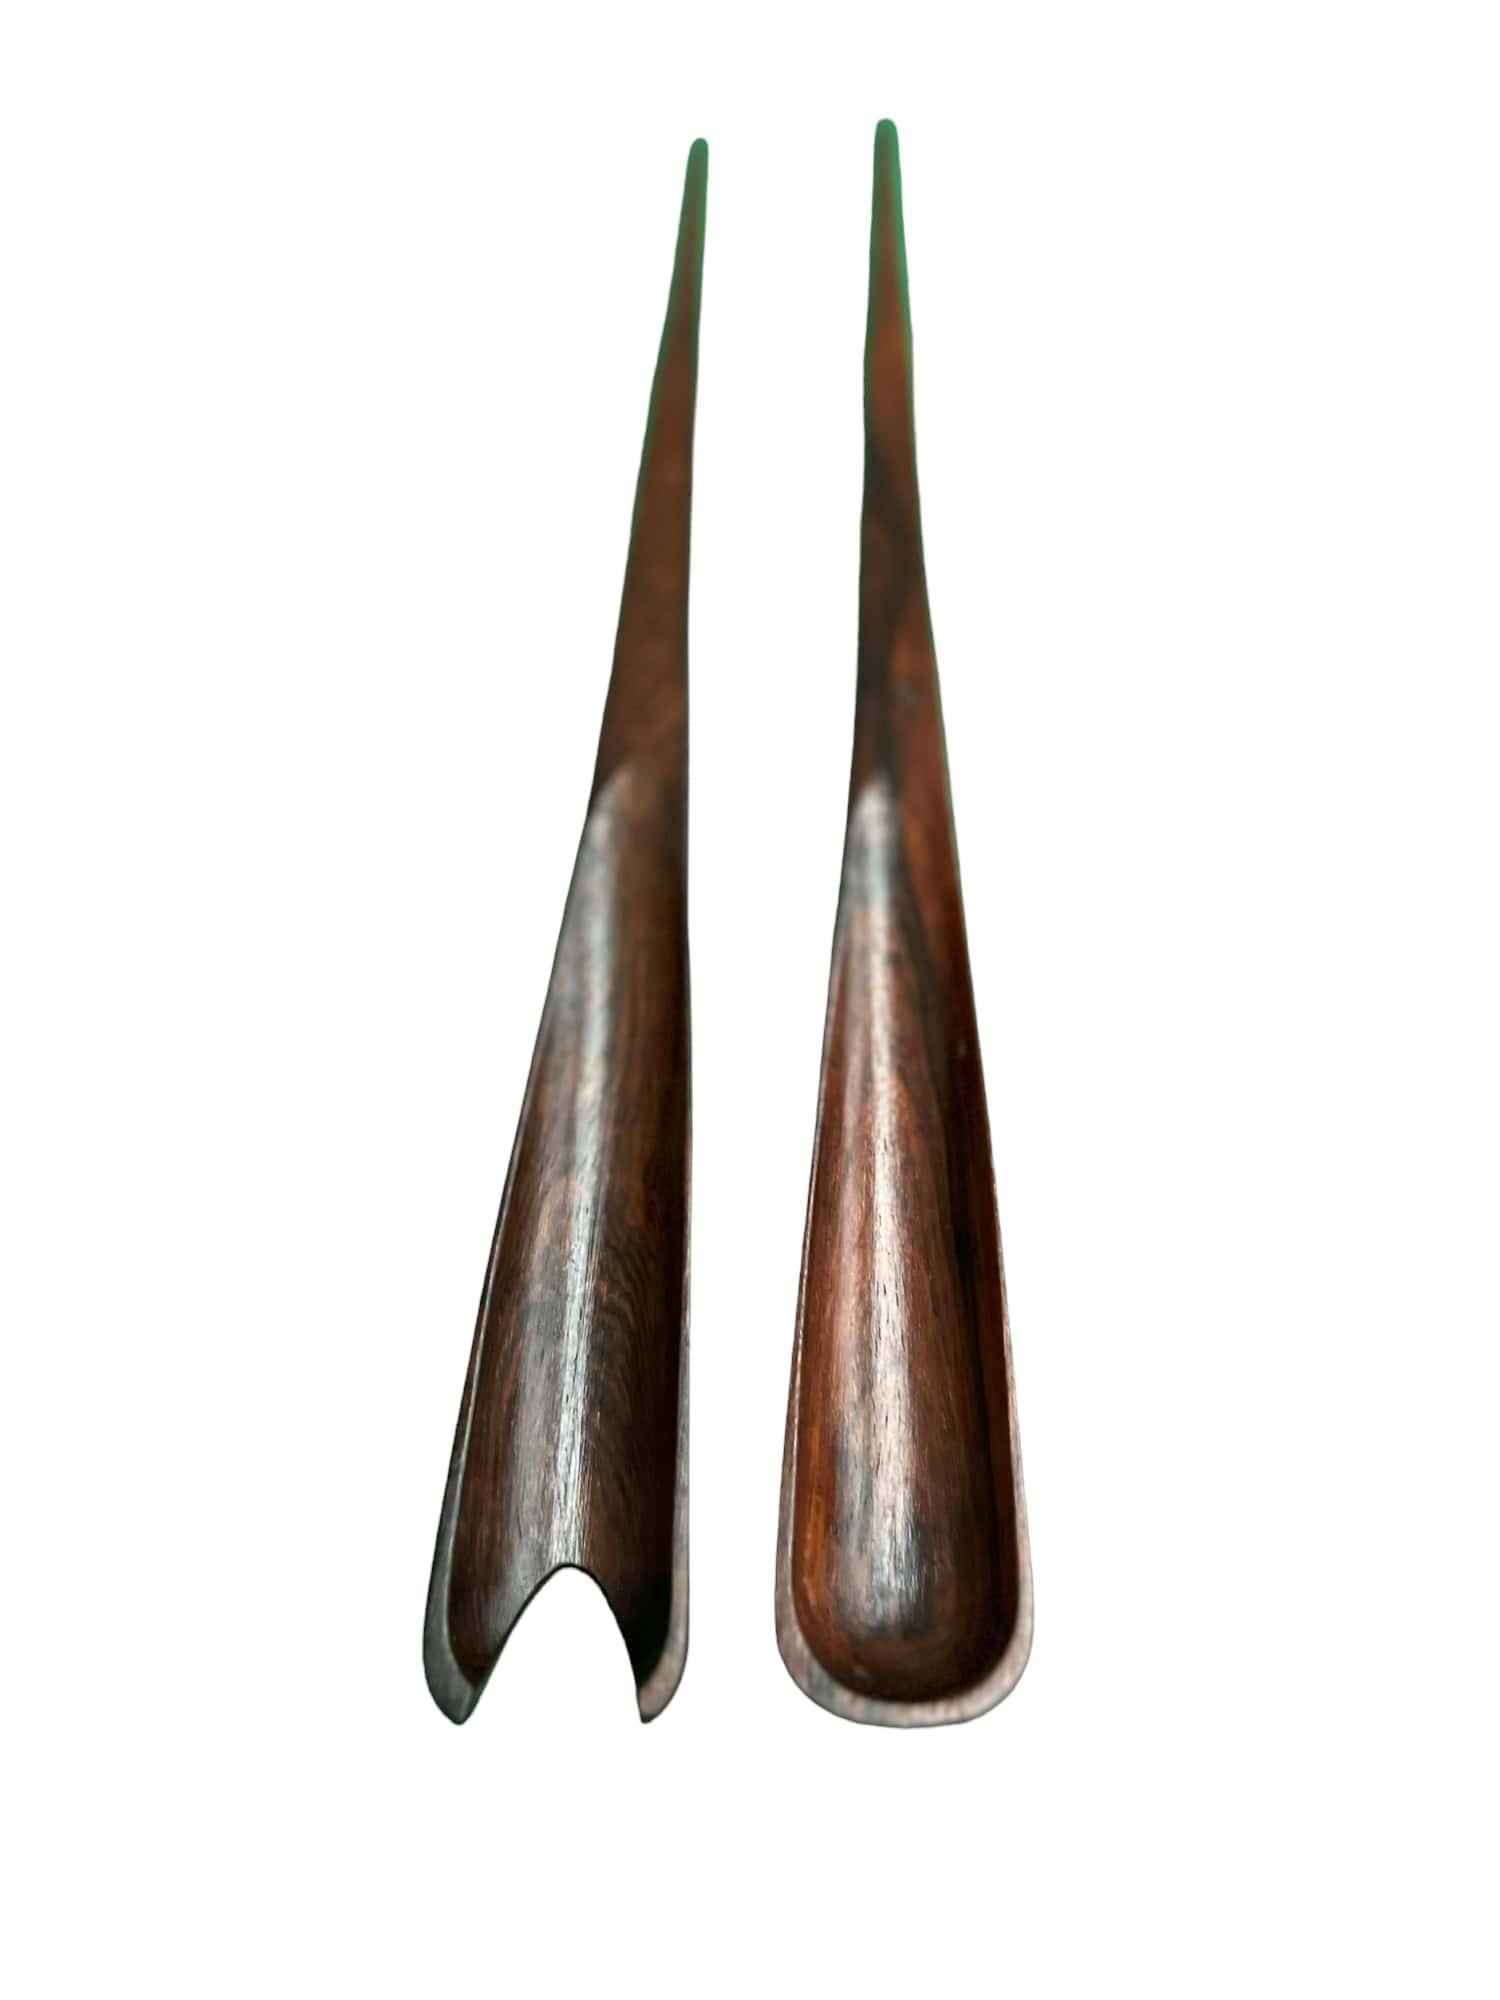 Brazilian Mid-Century Modern Salad Forks in Hardwood, by Jean Gillon, 1960s In Good Condition For Sale In New York, NY